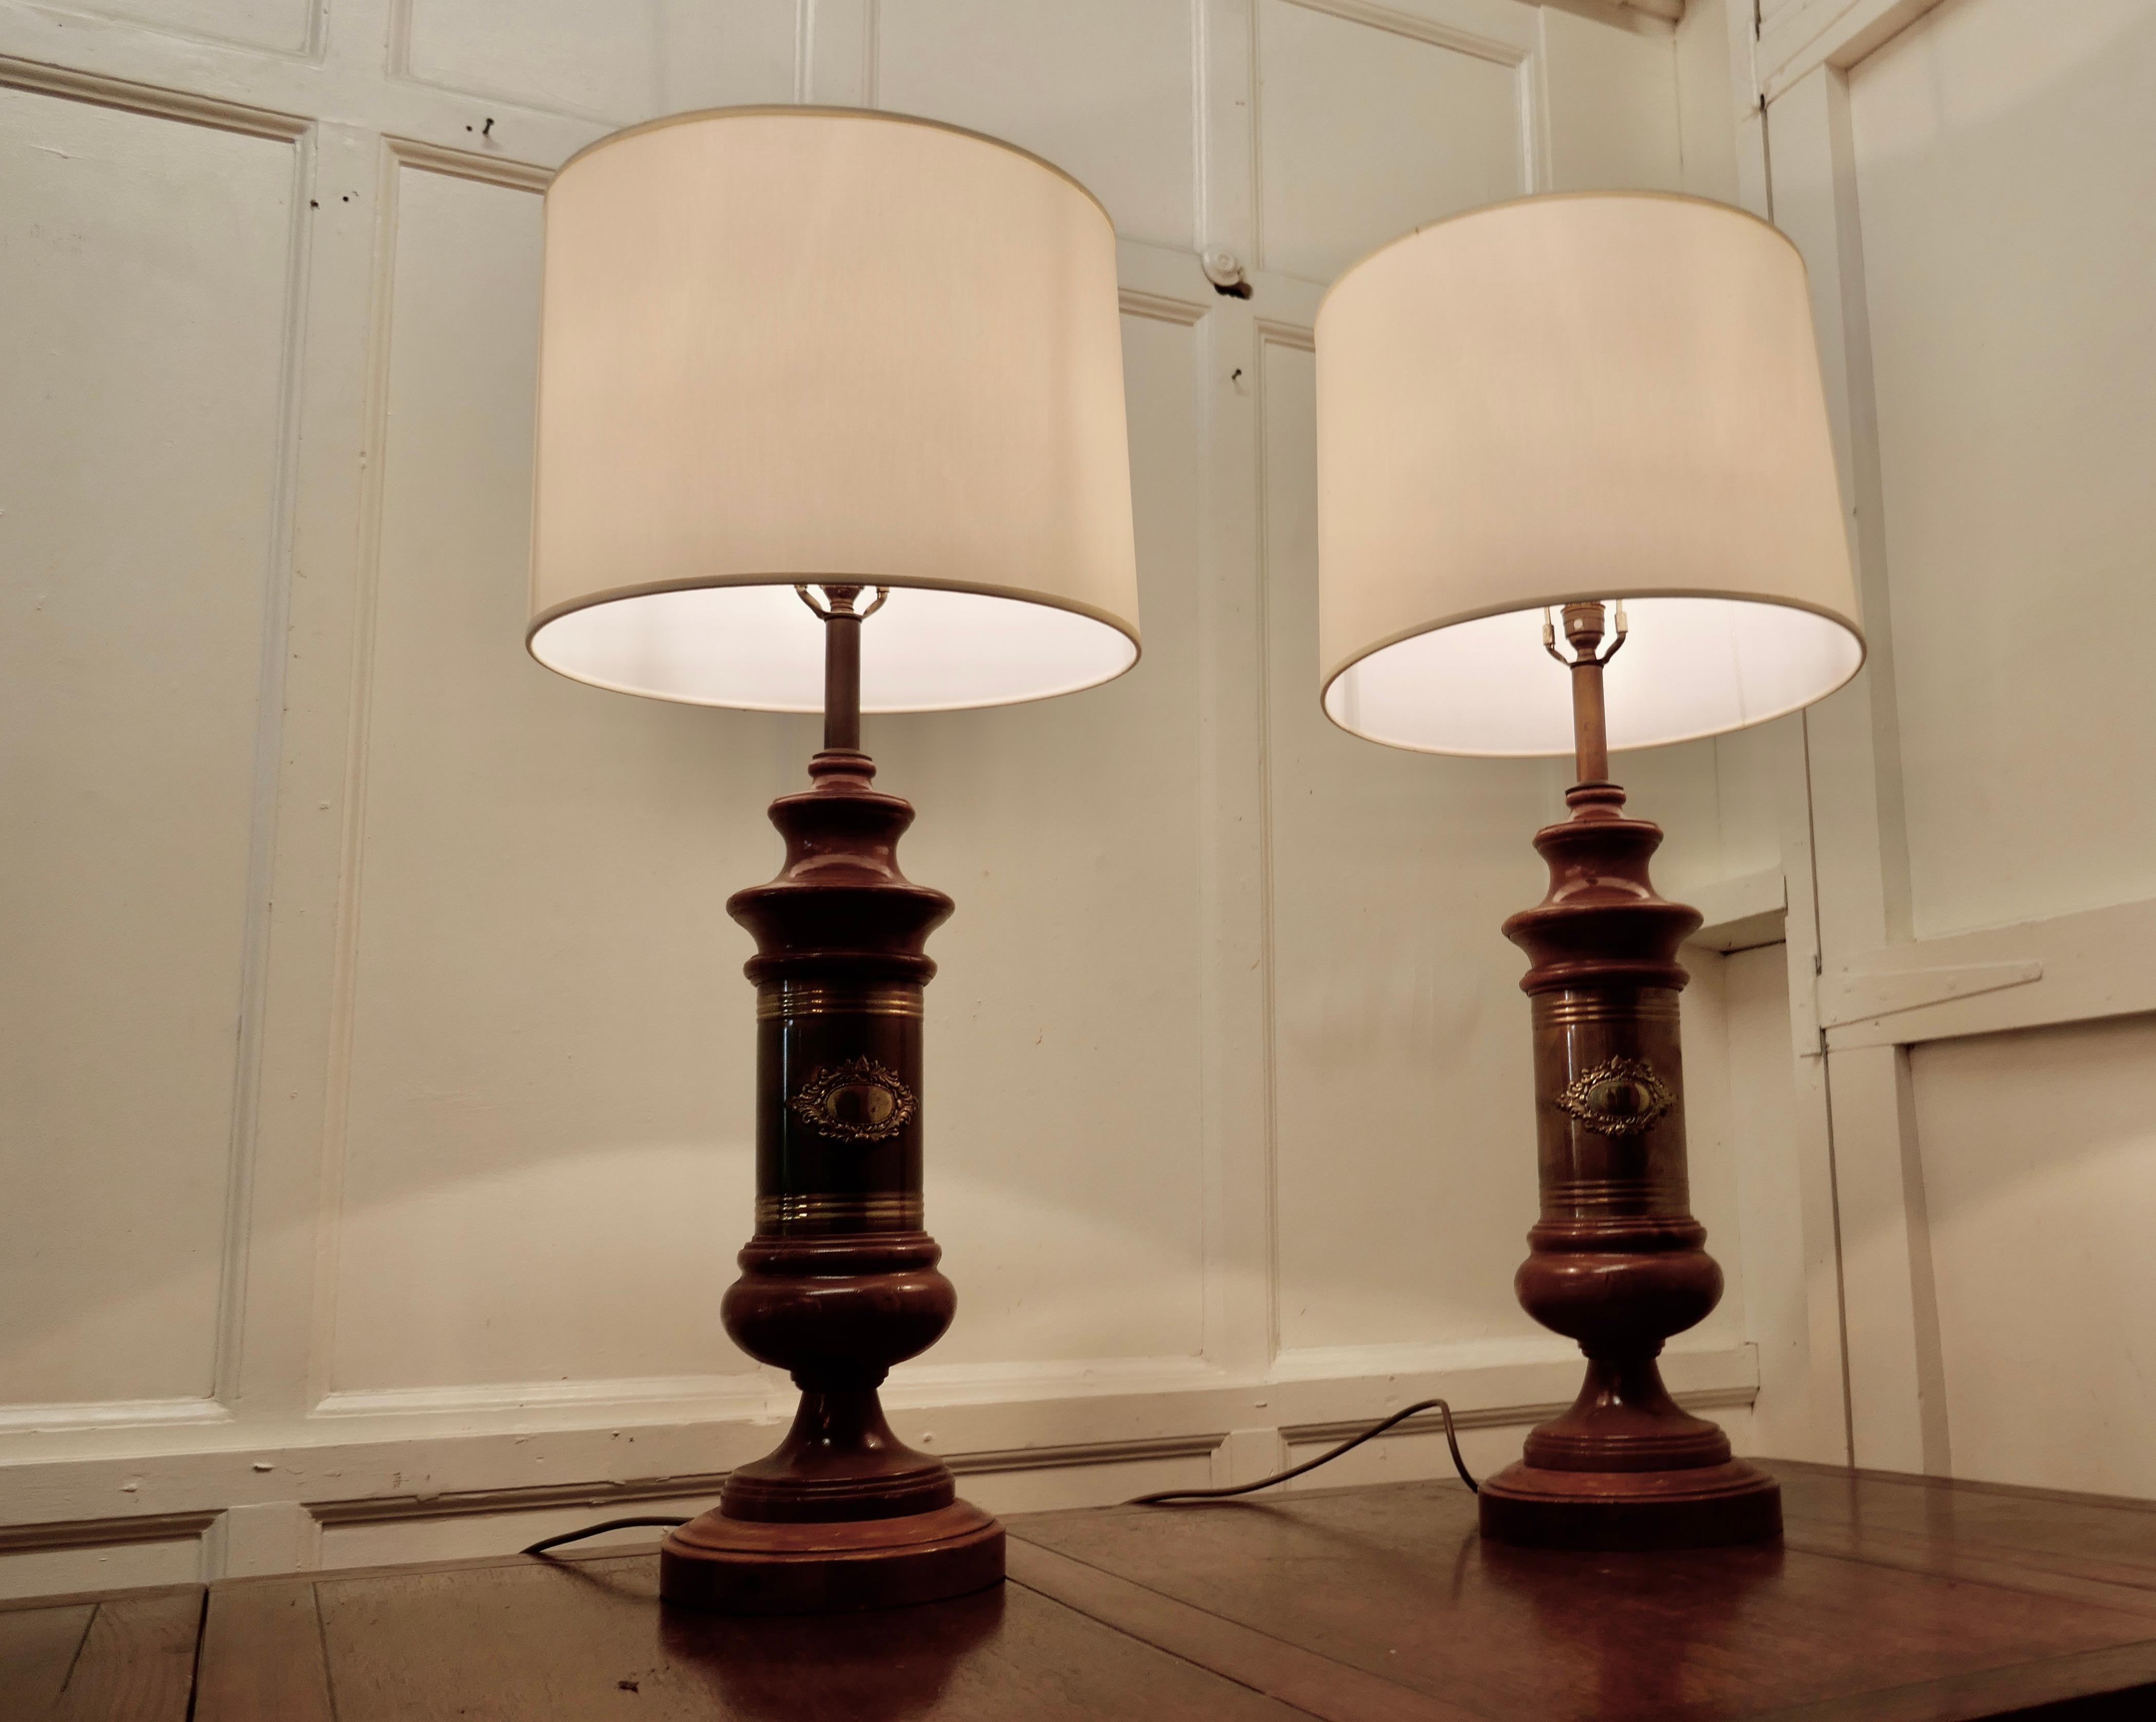 Pair of Tall Art Deco Style Column Table Lamps In Good Condition For Sale In Chillerton, Isle of Wight